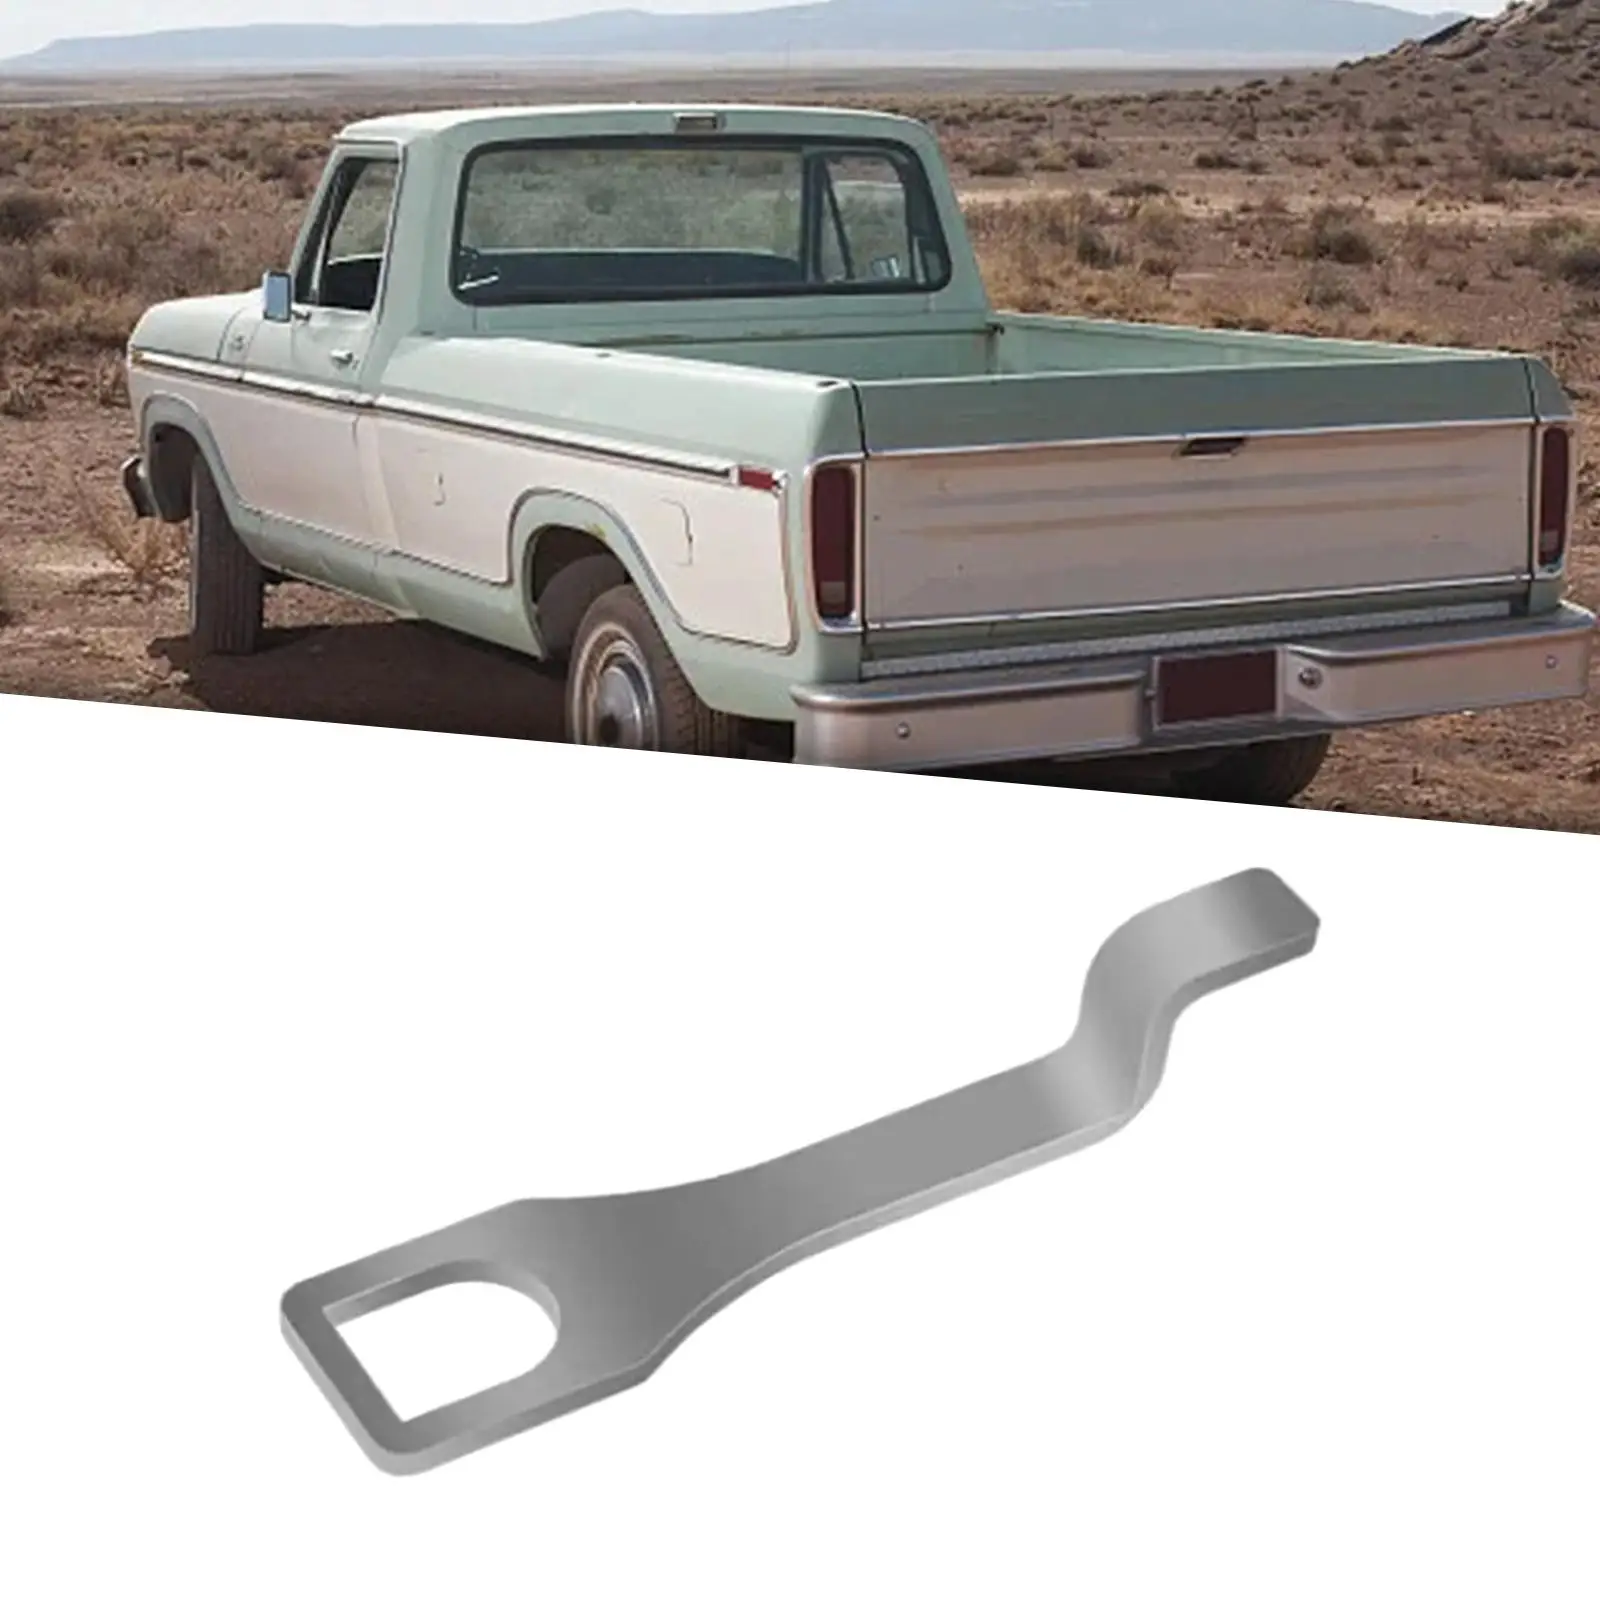 Metal Tailgate Standoff Easy to Install Assembly Durable Direct Replaces Length 15cm Air Vent Lock Hook Camping for VW